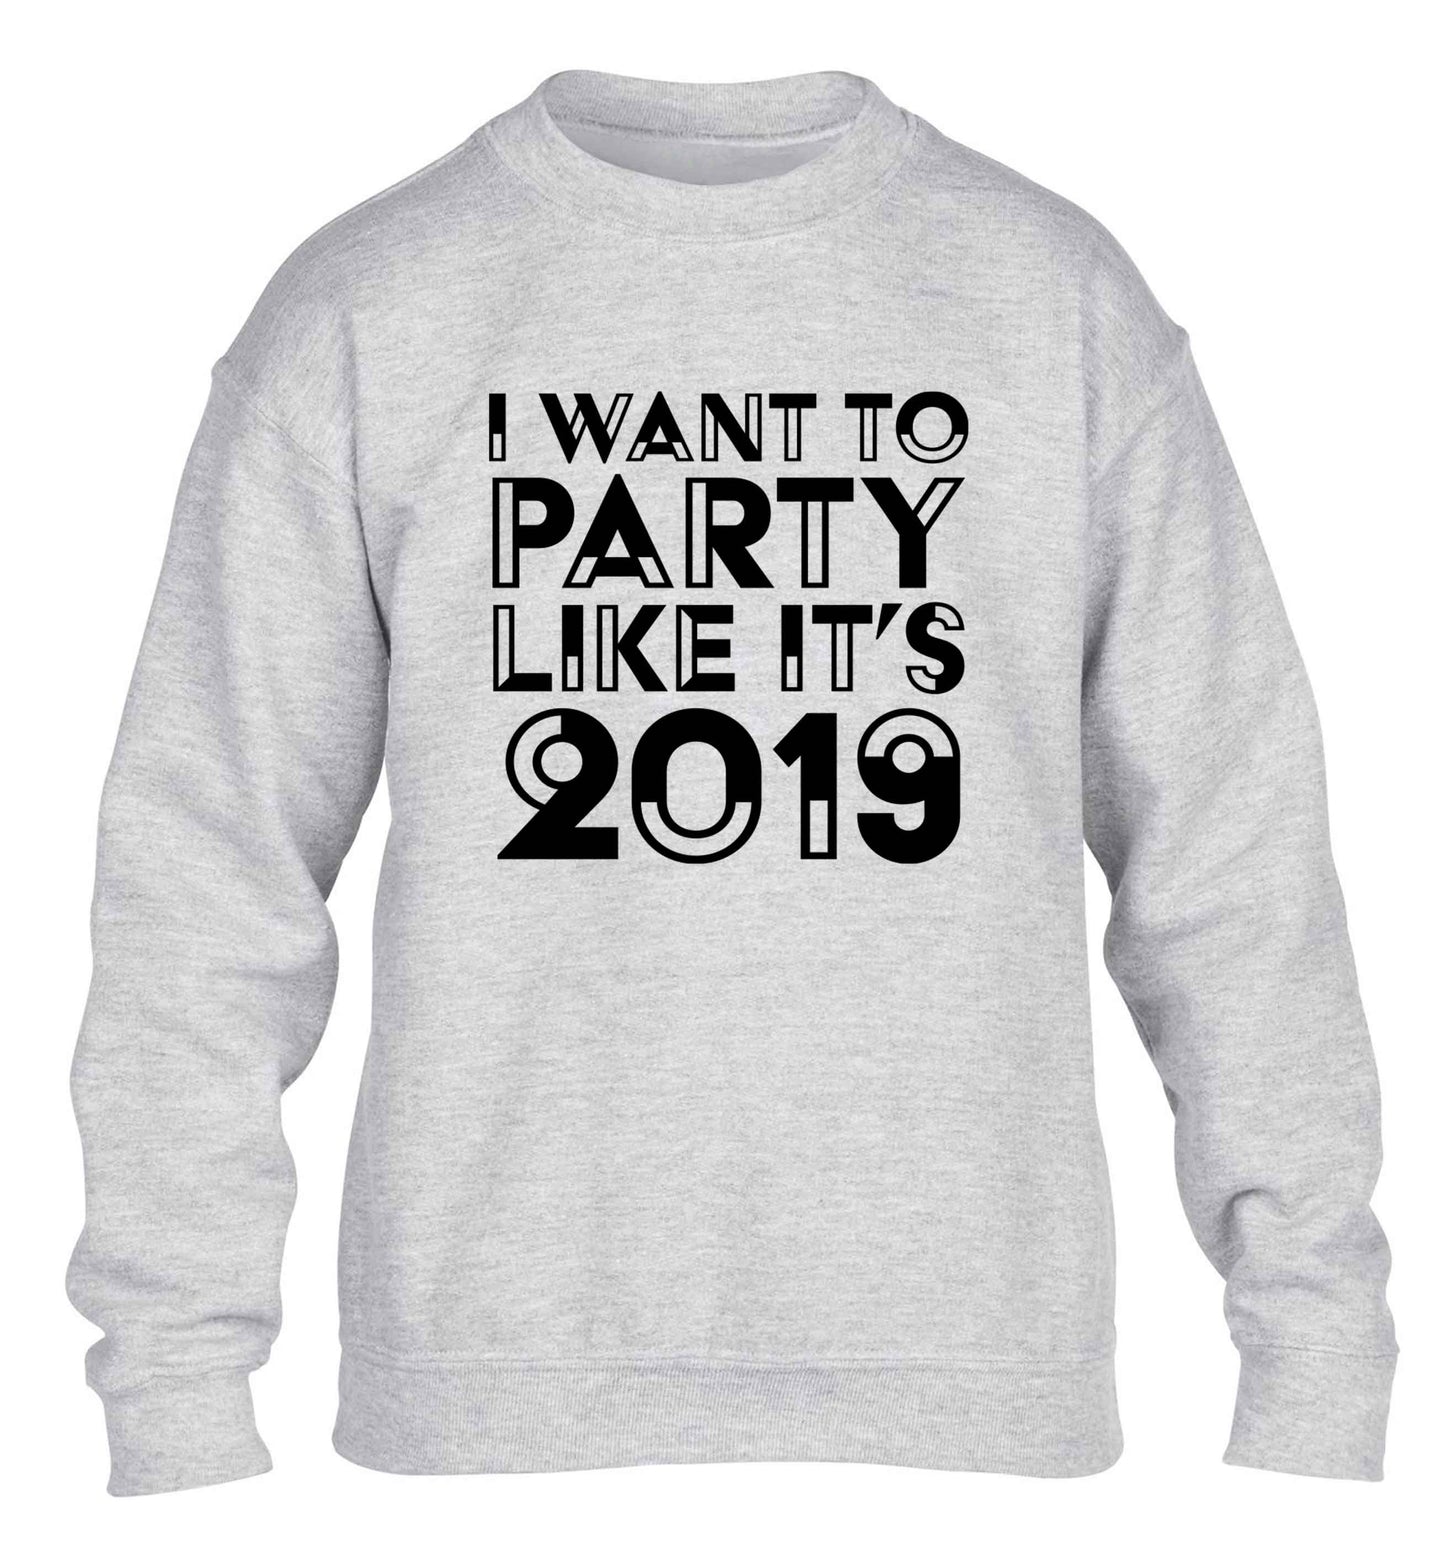 I want to party like it's 2019 children's grey sweater 12-13 Years